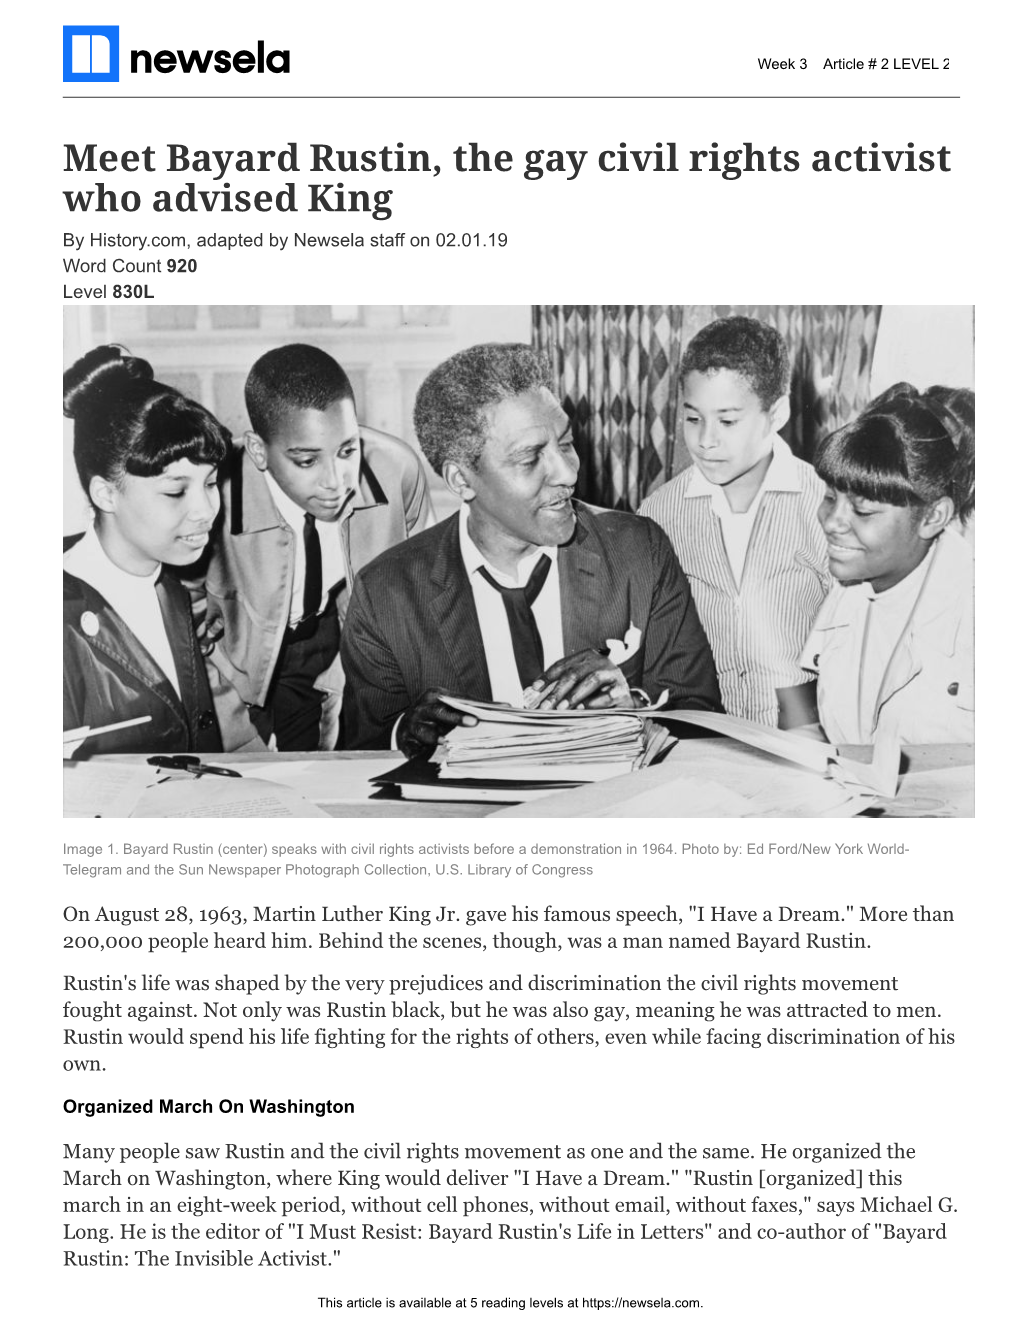 Meet Bayard Rustin, the Gay Civil Rights Activist Who Advised King by History.Com, Adapted by Newsela Staff on 02.01.19 Word Count 920 Level 830L